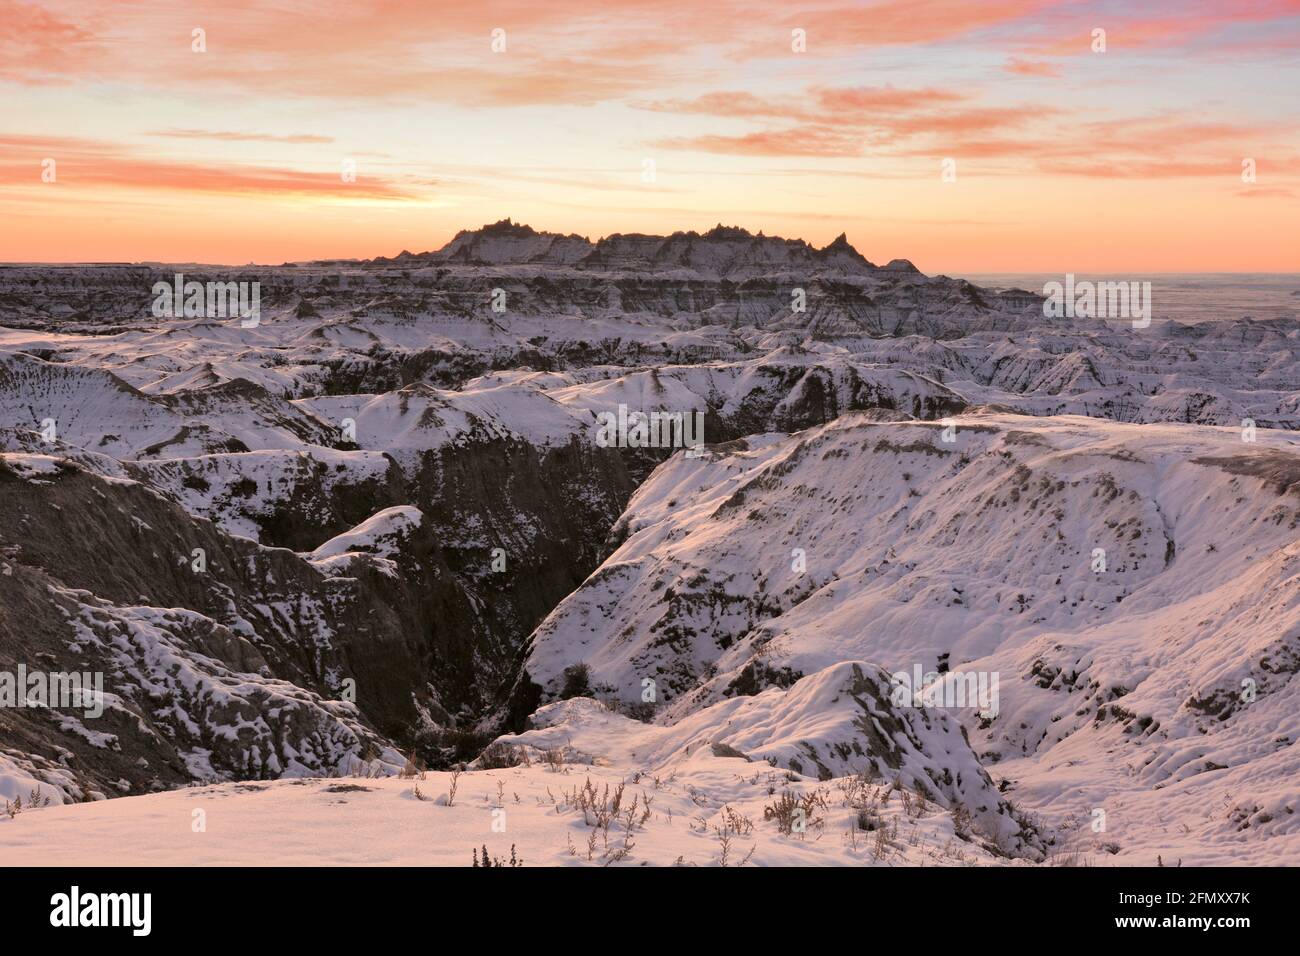 Snow-covered spires and canyons greet the sunrise in the South Dakota badlands Stock Photo